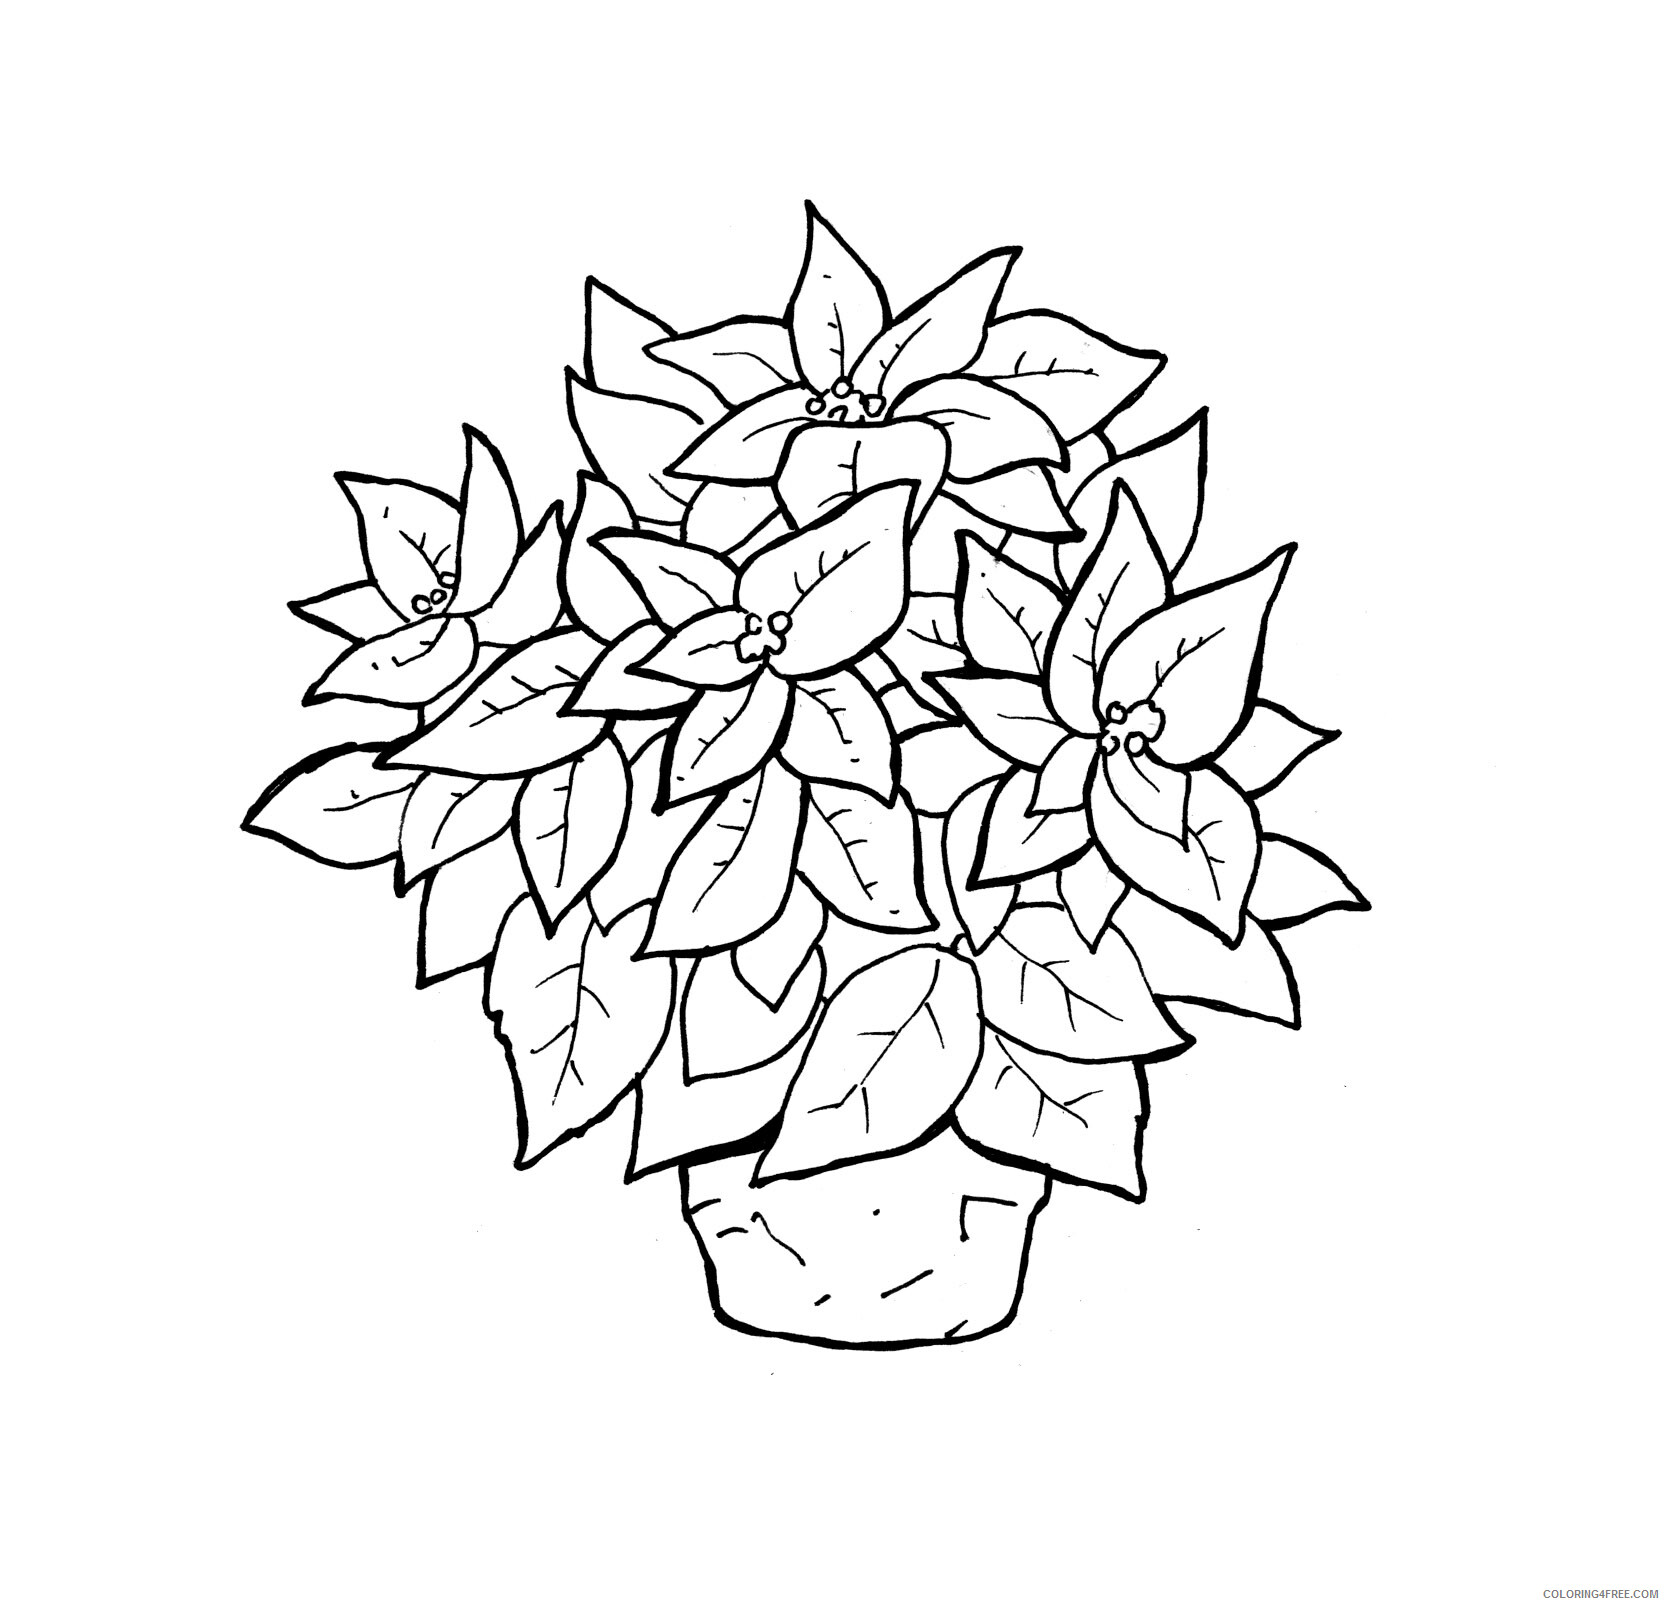 Poinsettia Coloring Pages Flowers Nature Poinsettia Pictures Printable 2021 311 Coloring4free